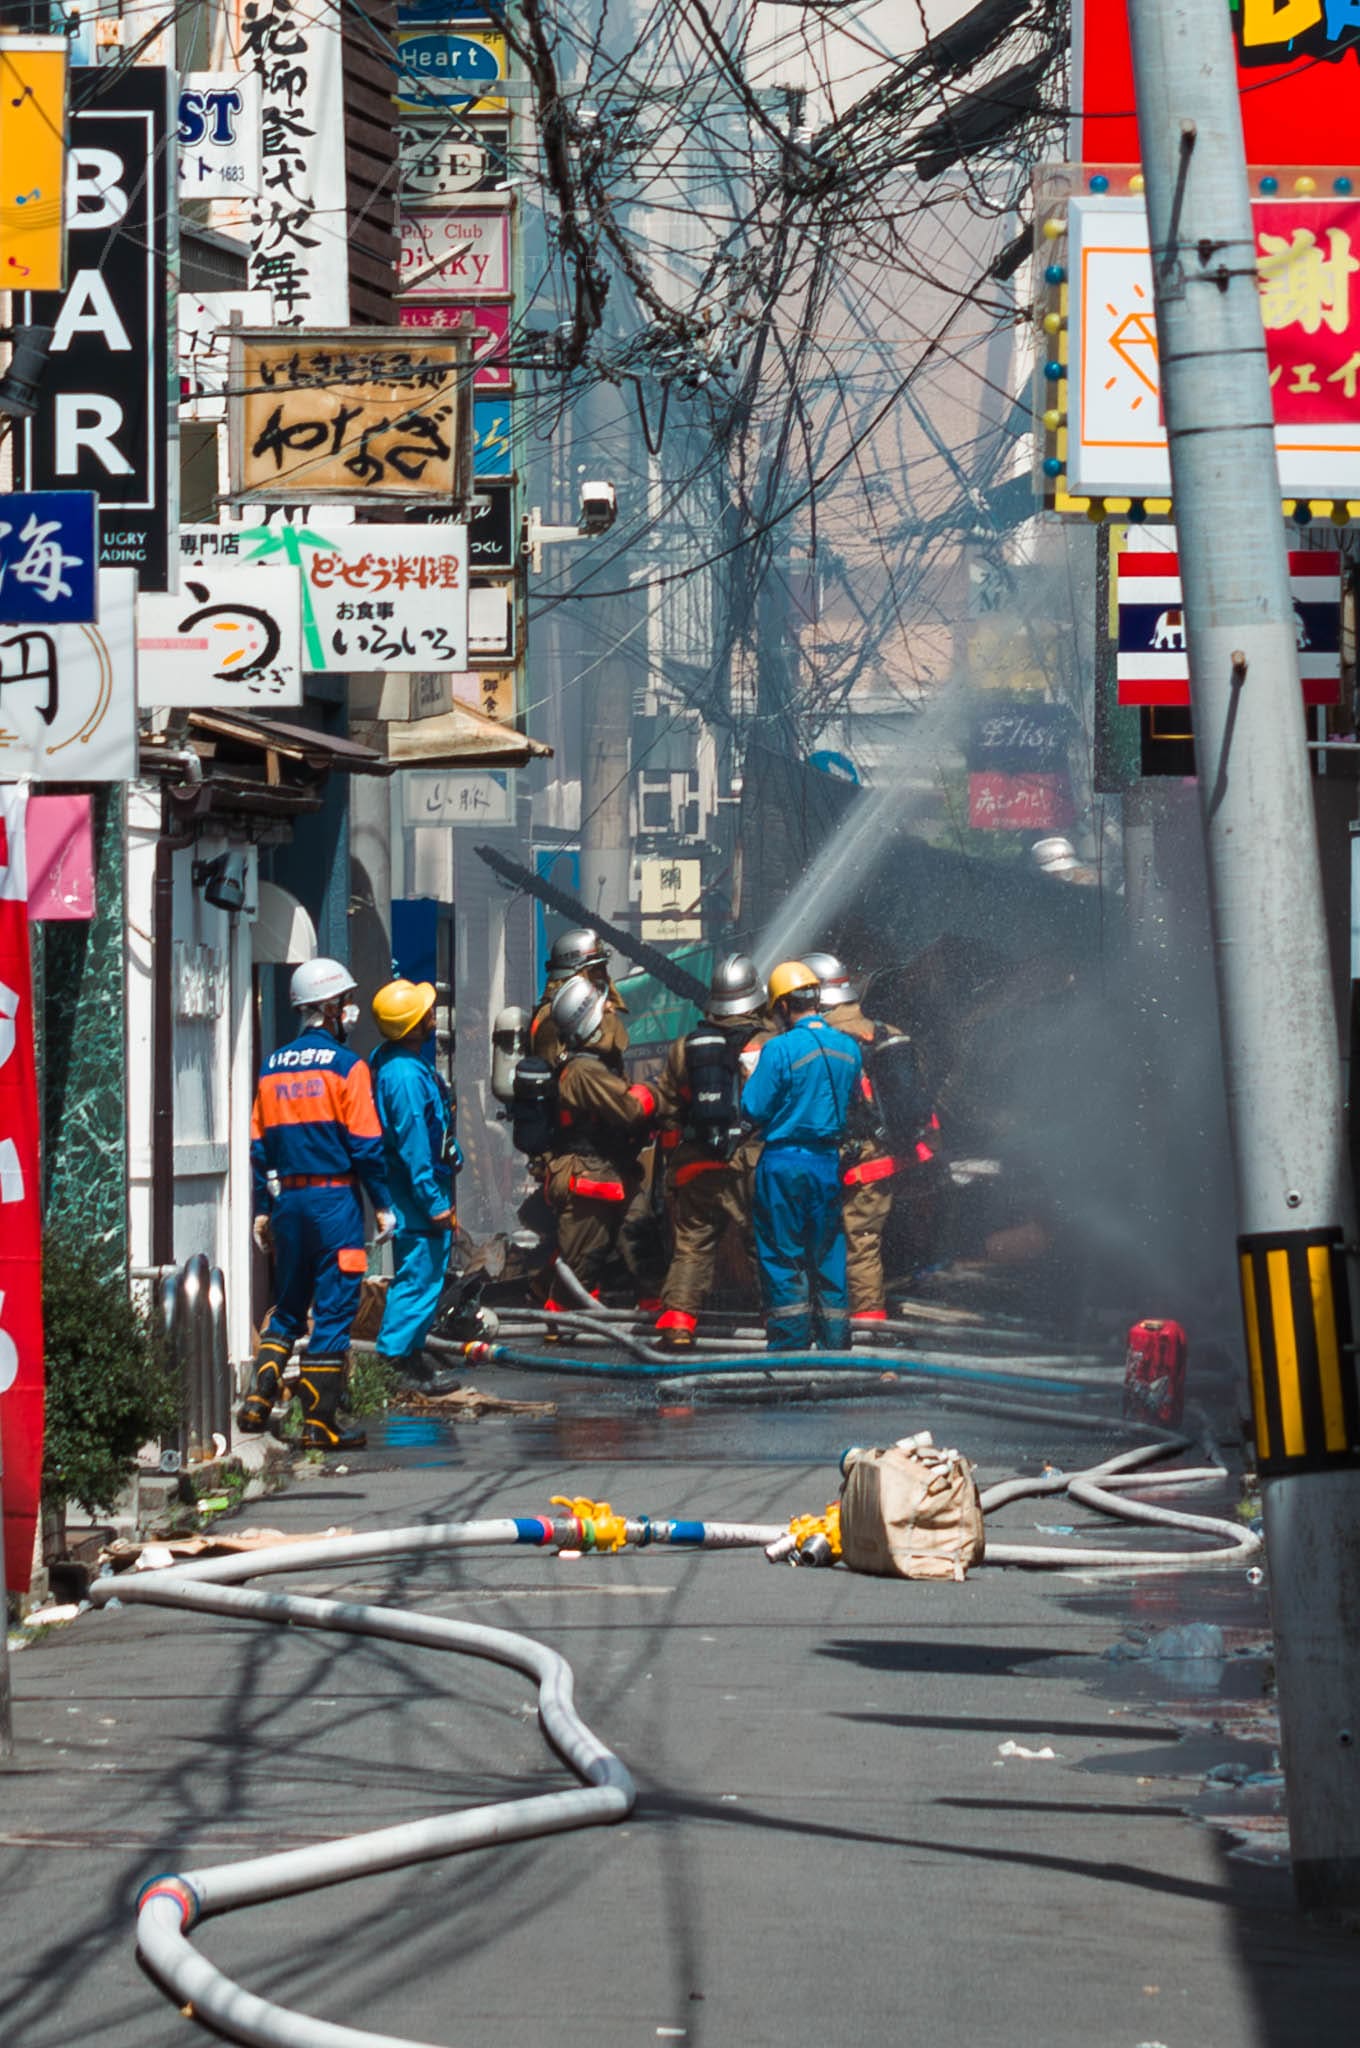 Japanese Firefighters battle intense blaze in urban setting under tangled wires.